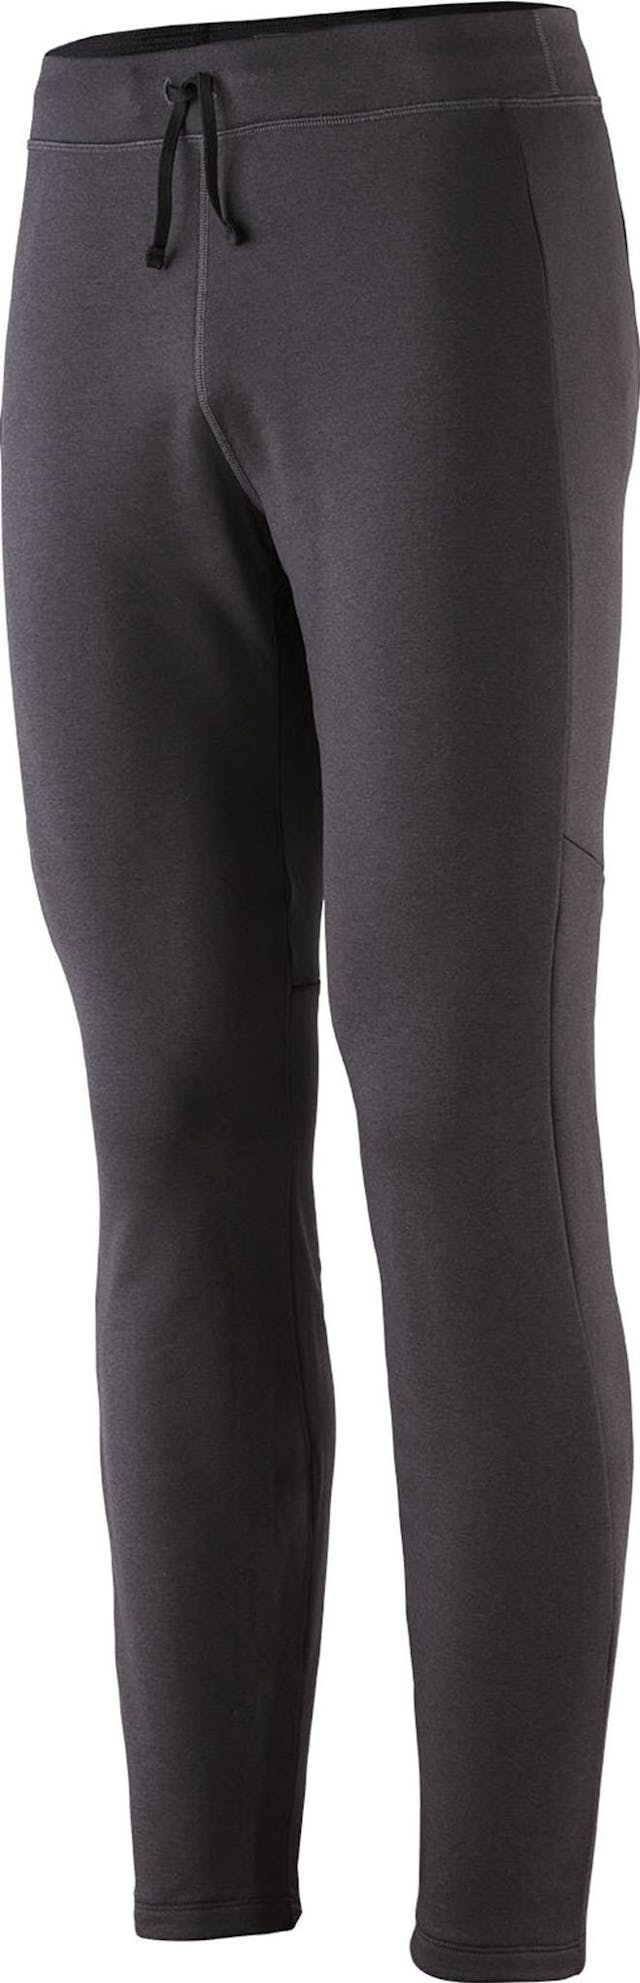 Product image for R1 Daily Baselayer Bottoms - Men's